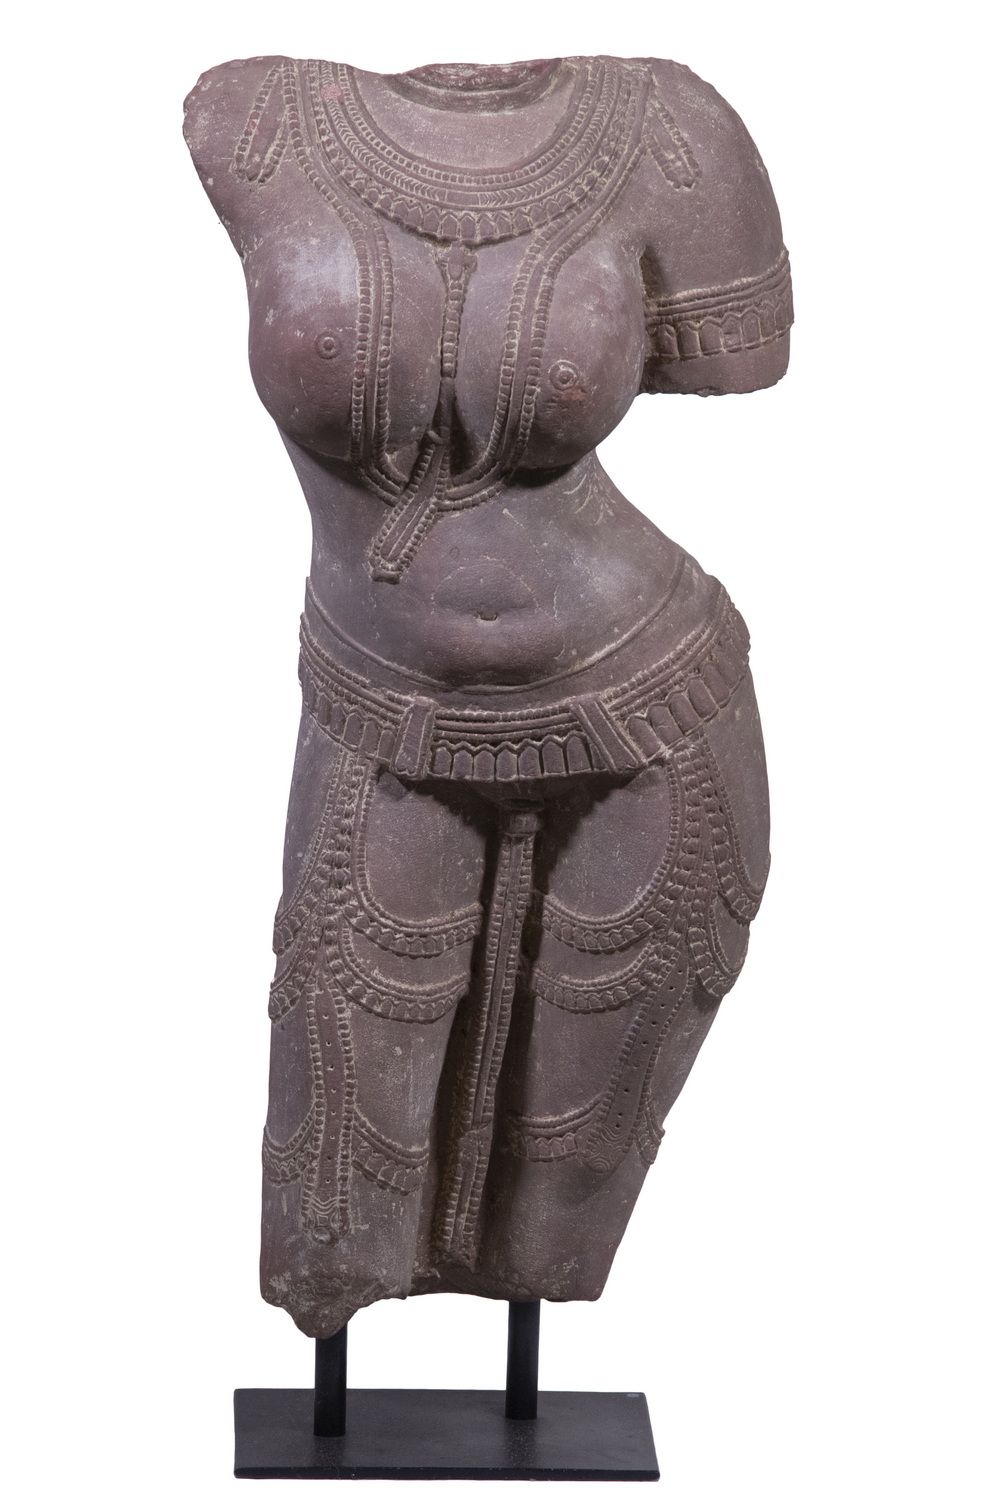 ANCIENT INDIAN STONE FIGURE OF